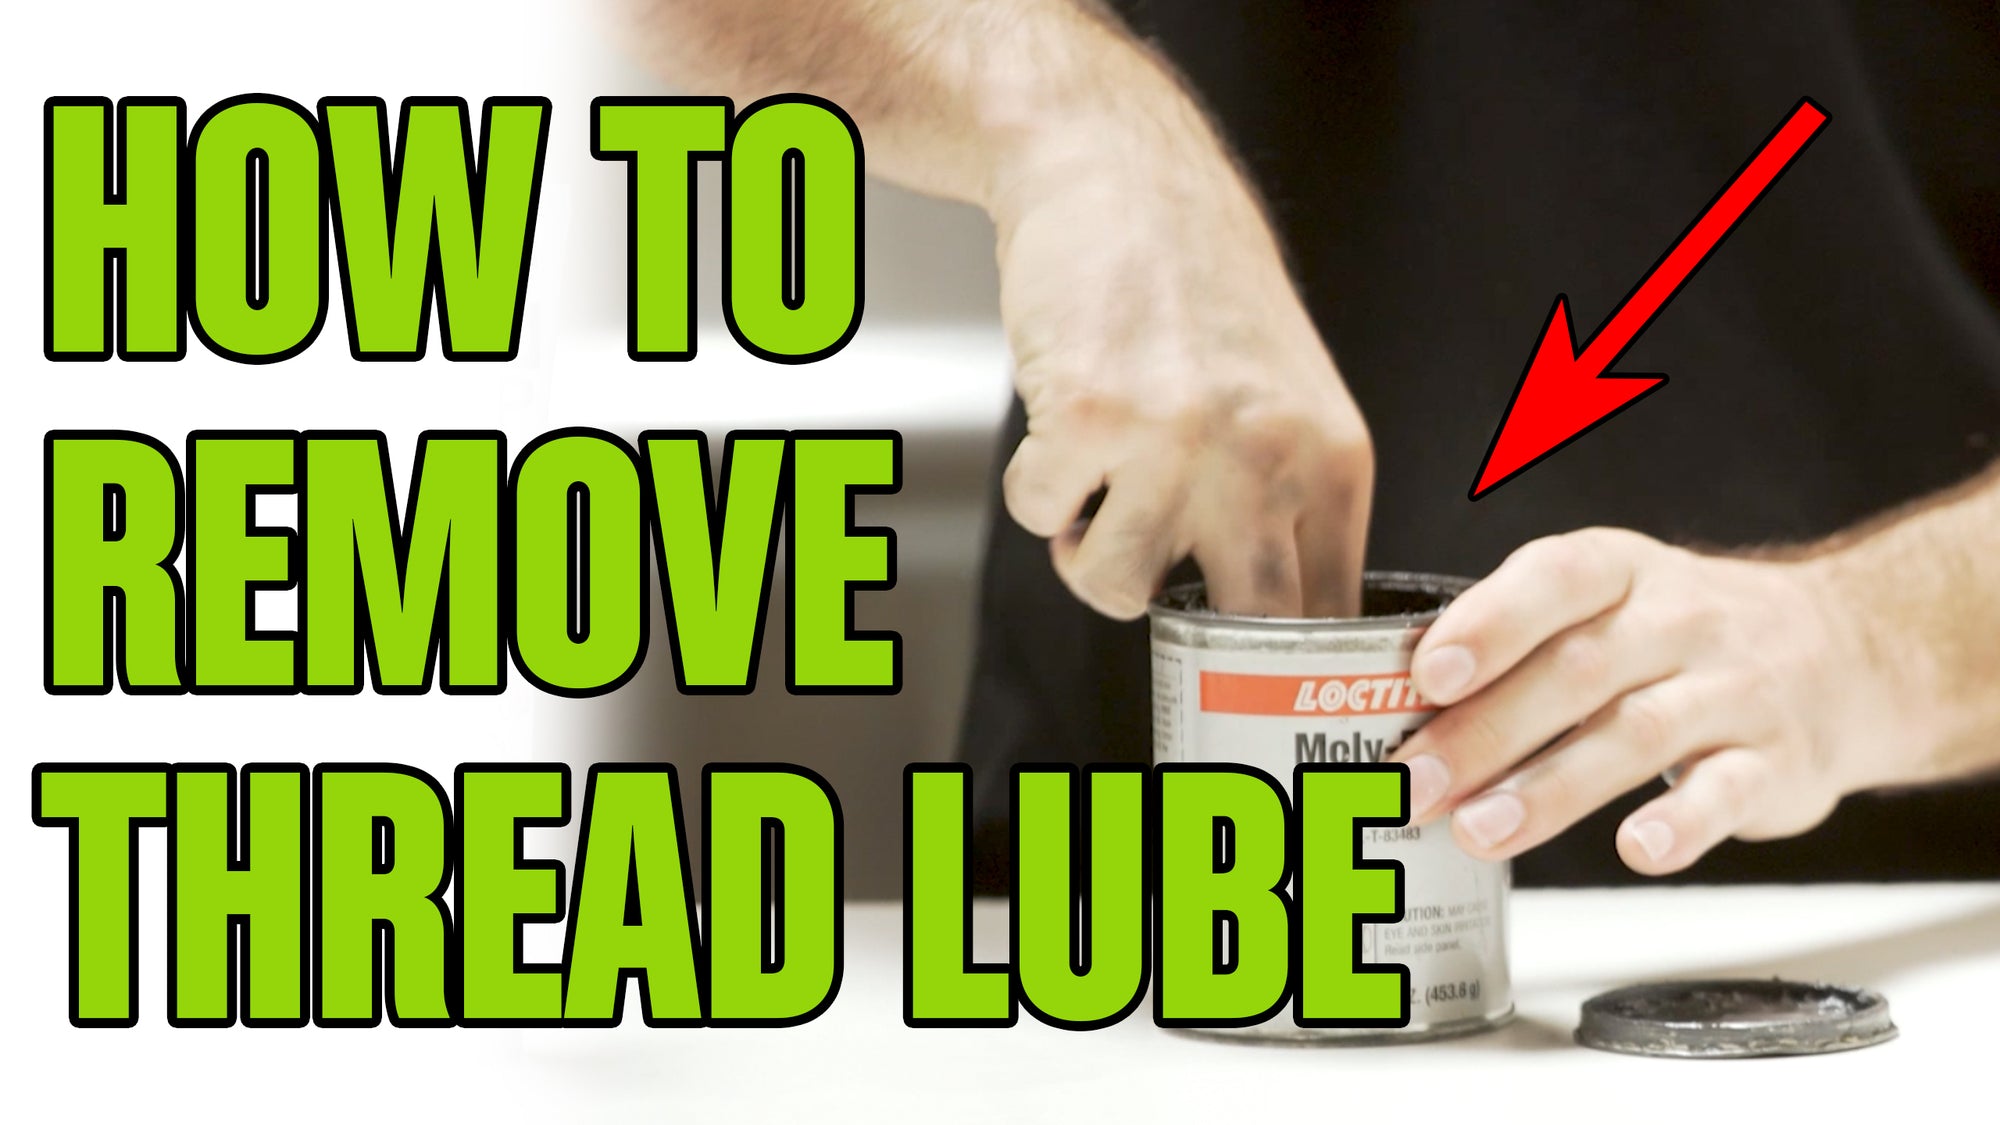 HOW TO REMOVE: Thread Lubricant Grease From Your Hands